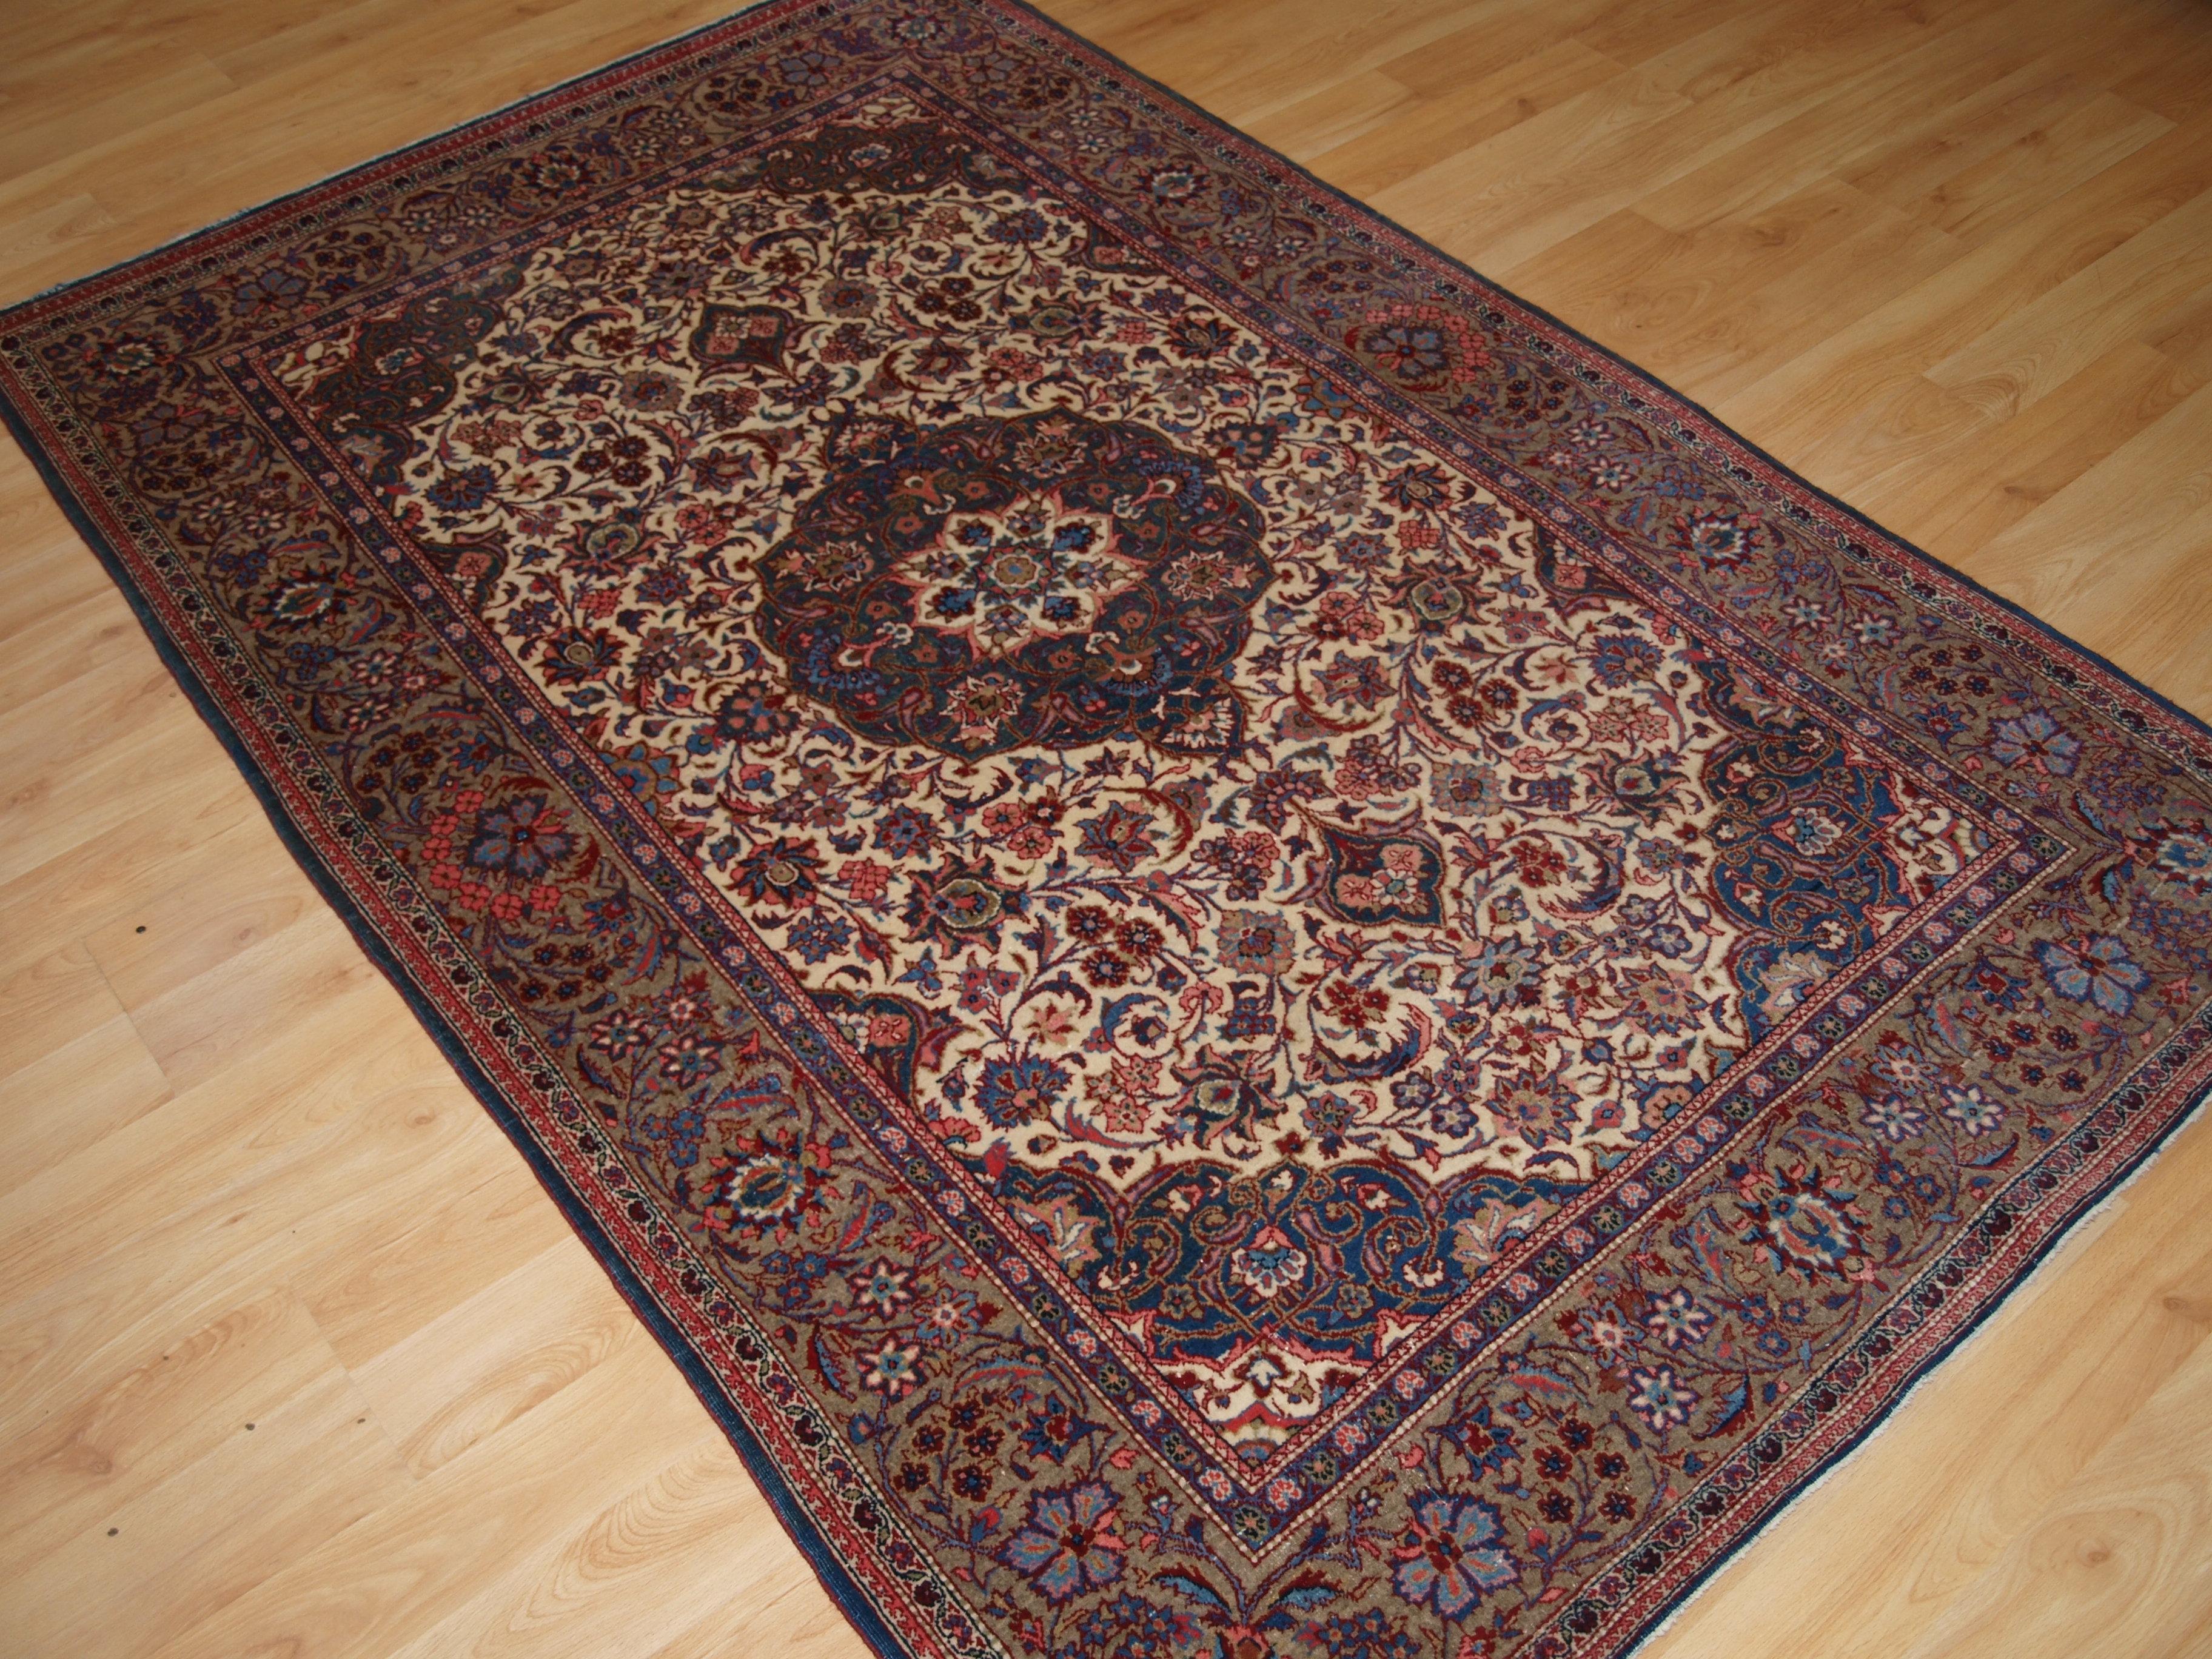 Antique Tabriz Rug Of Classic Fl Design With A Central Medallion On Light Ivory Ground